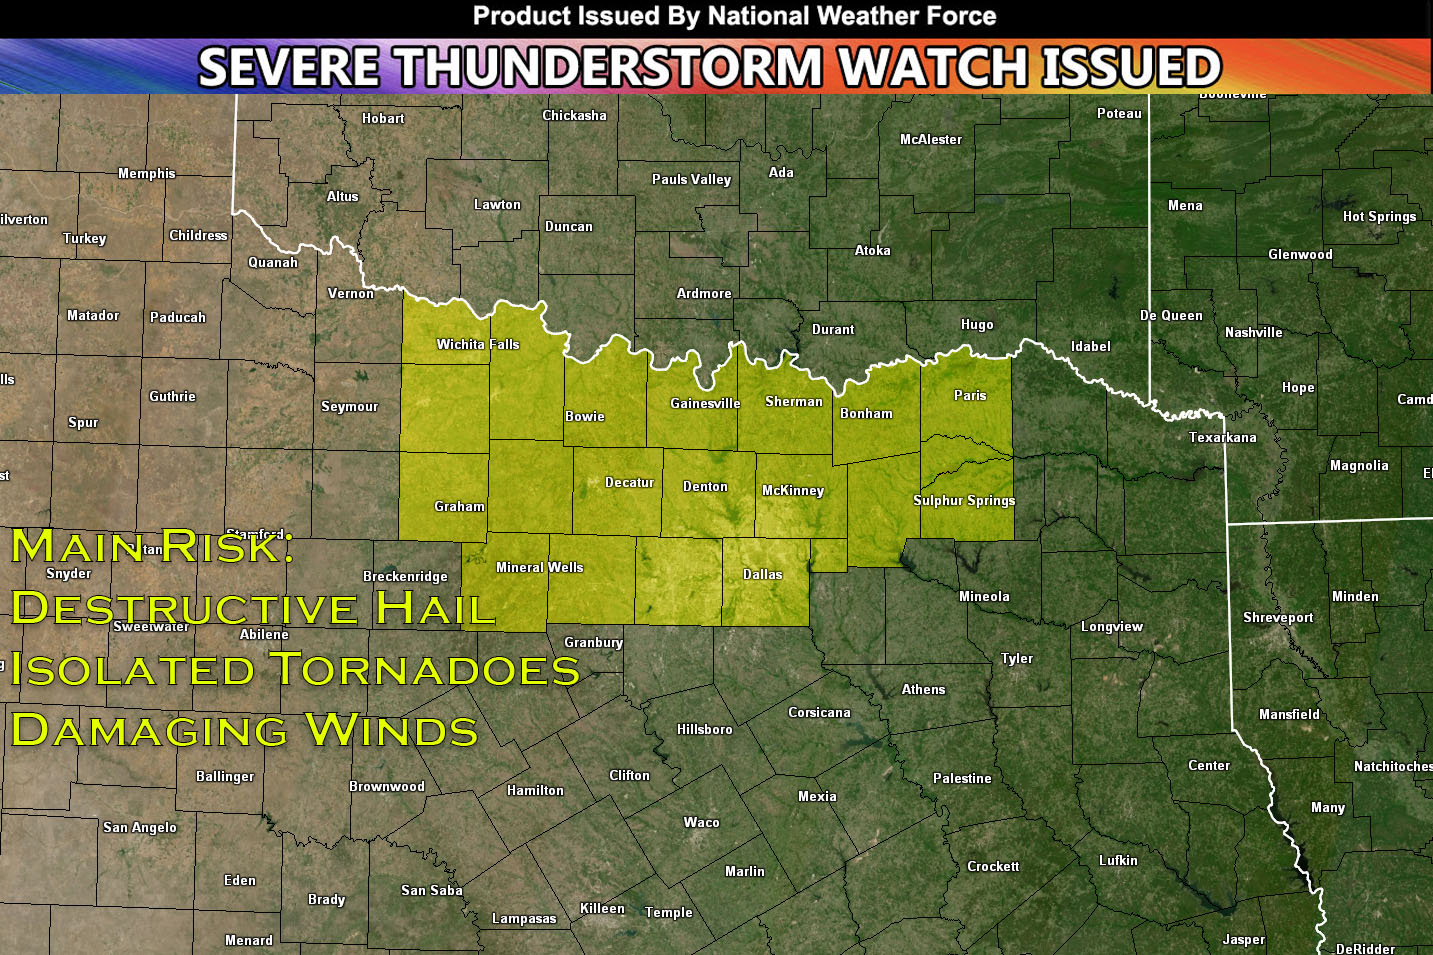 Severe Thunderstorm Watch Issued for Northern Texas until 11pm CDT